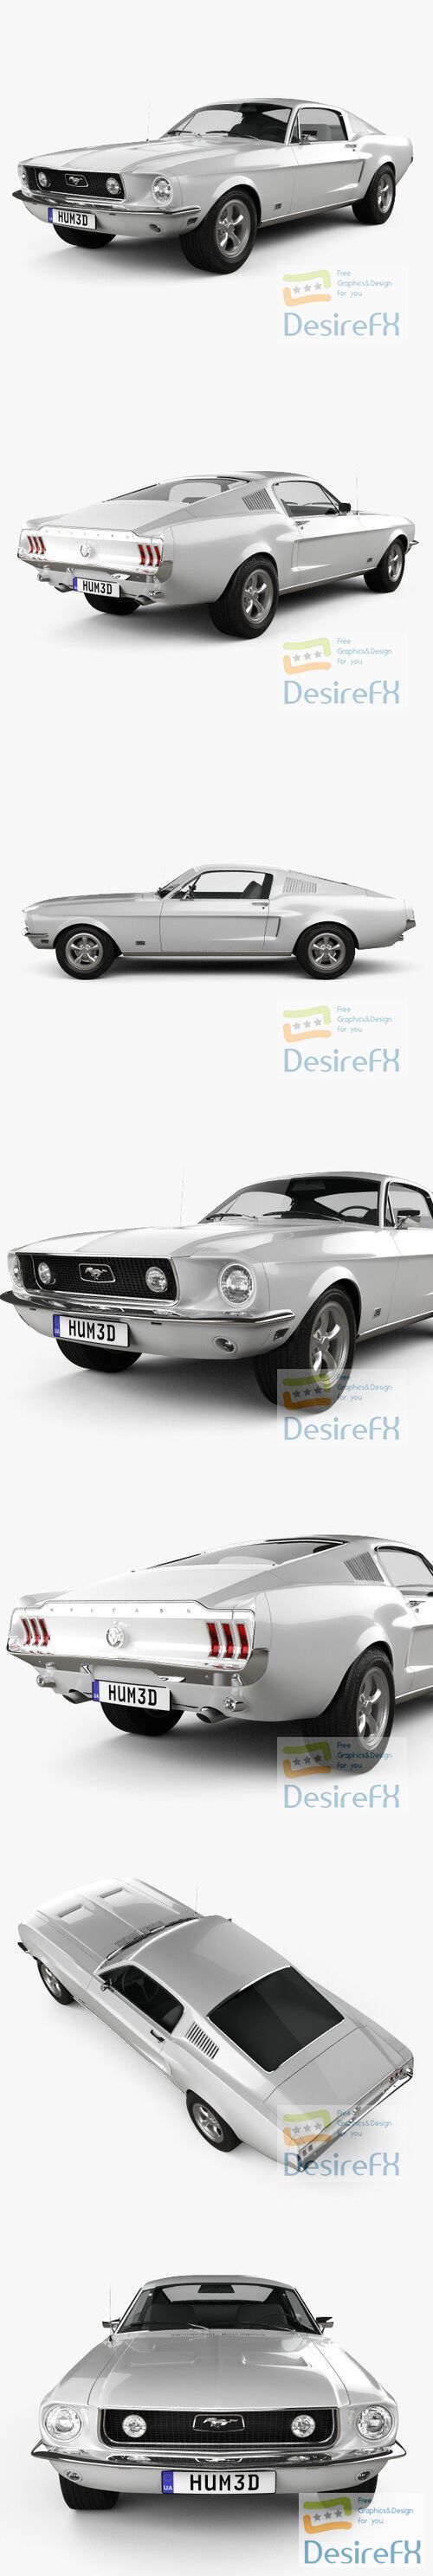 Ford Mustang GT 1967 3D Model